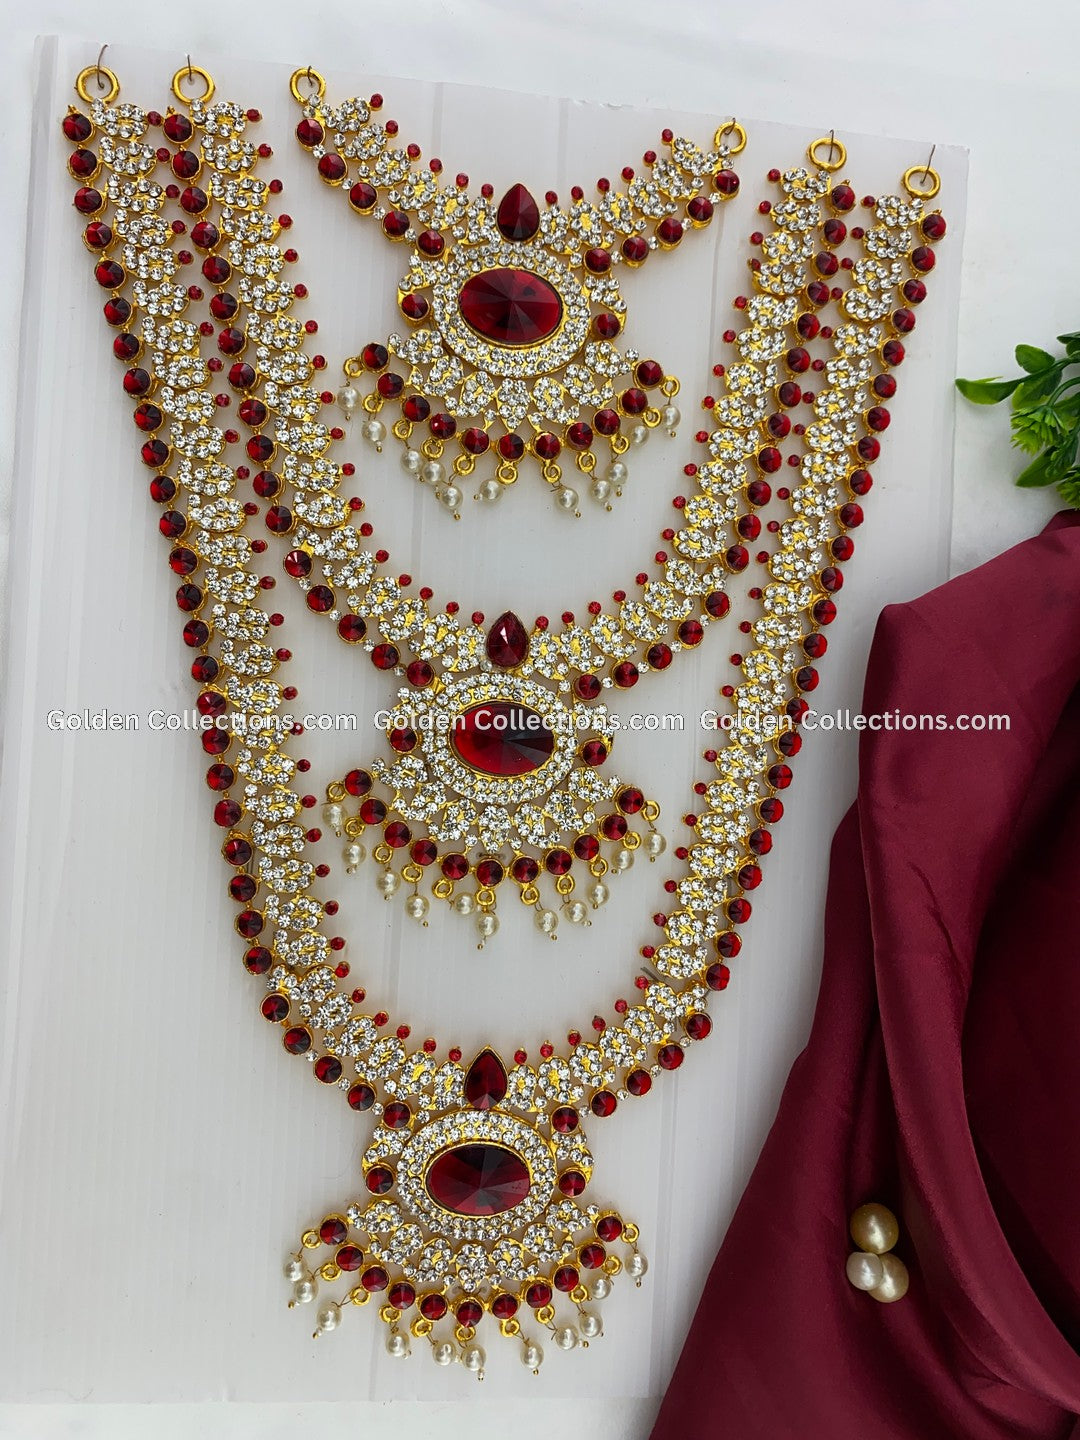 Authentic God Jewellery - GoldenCollections